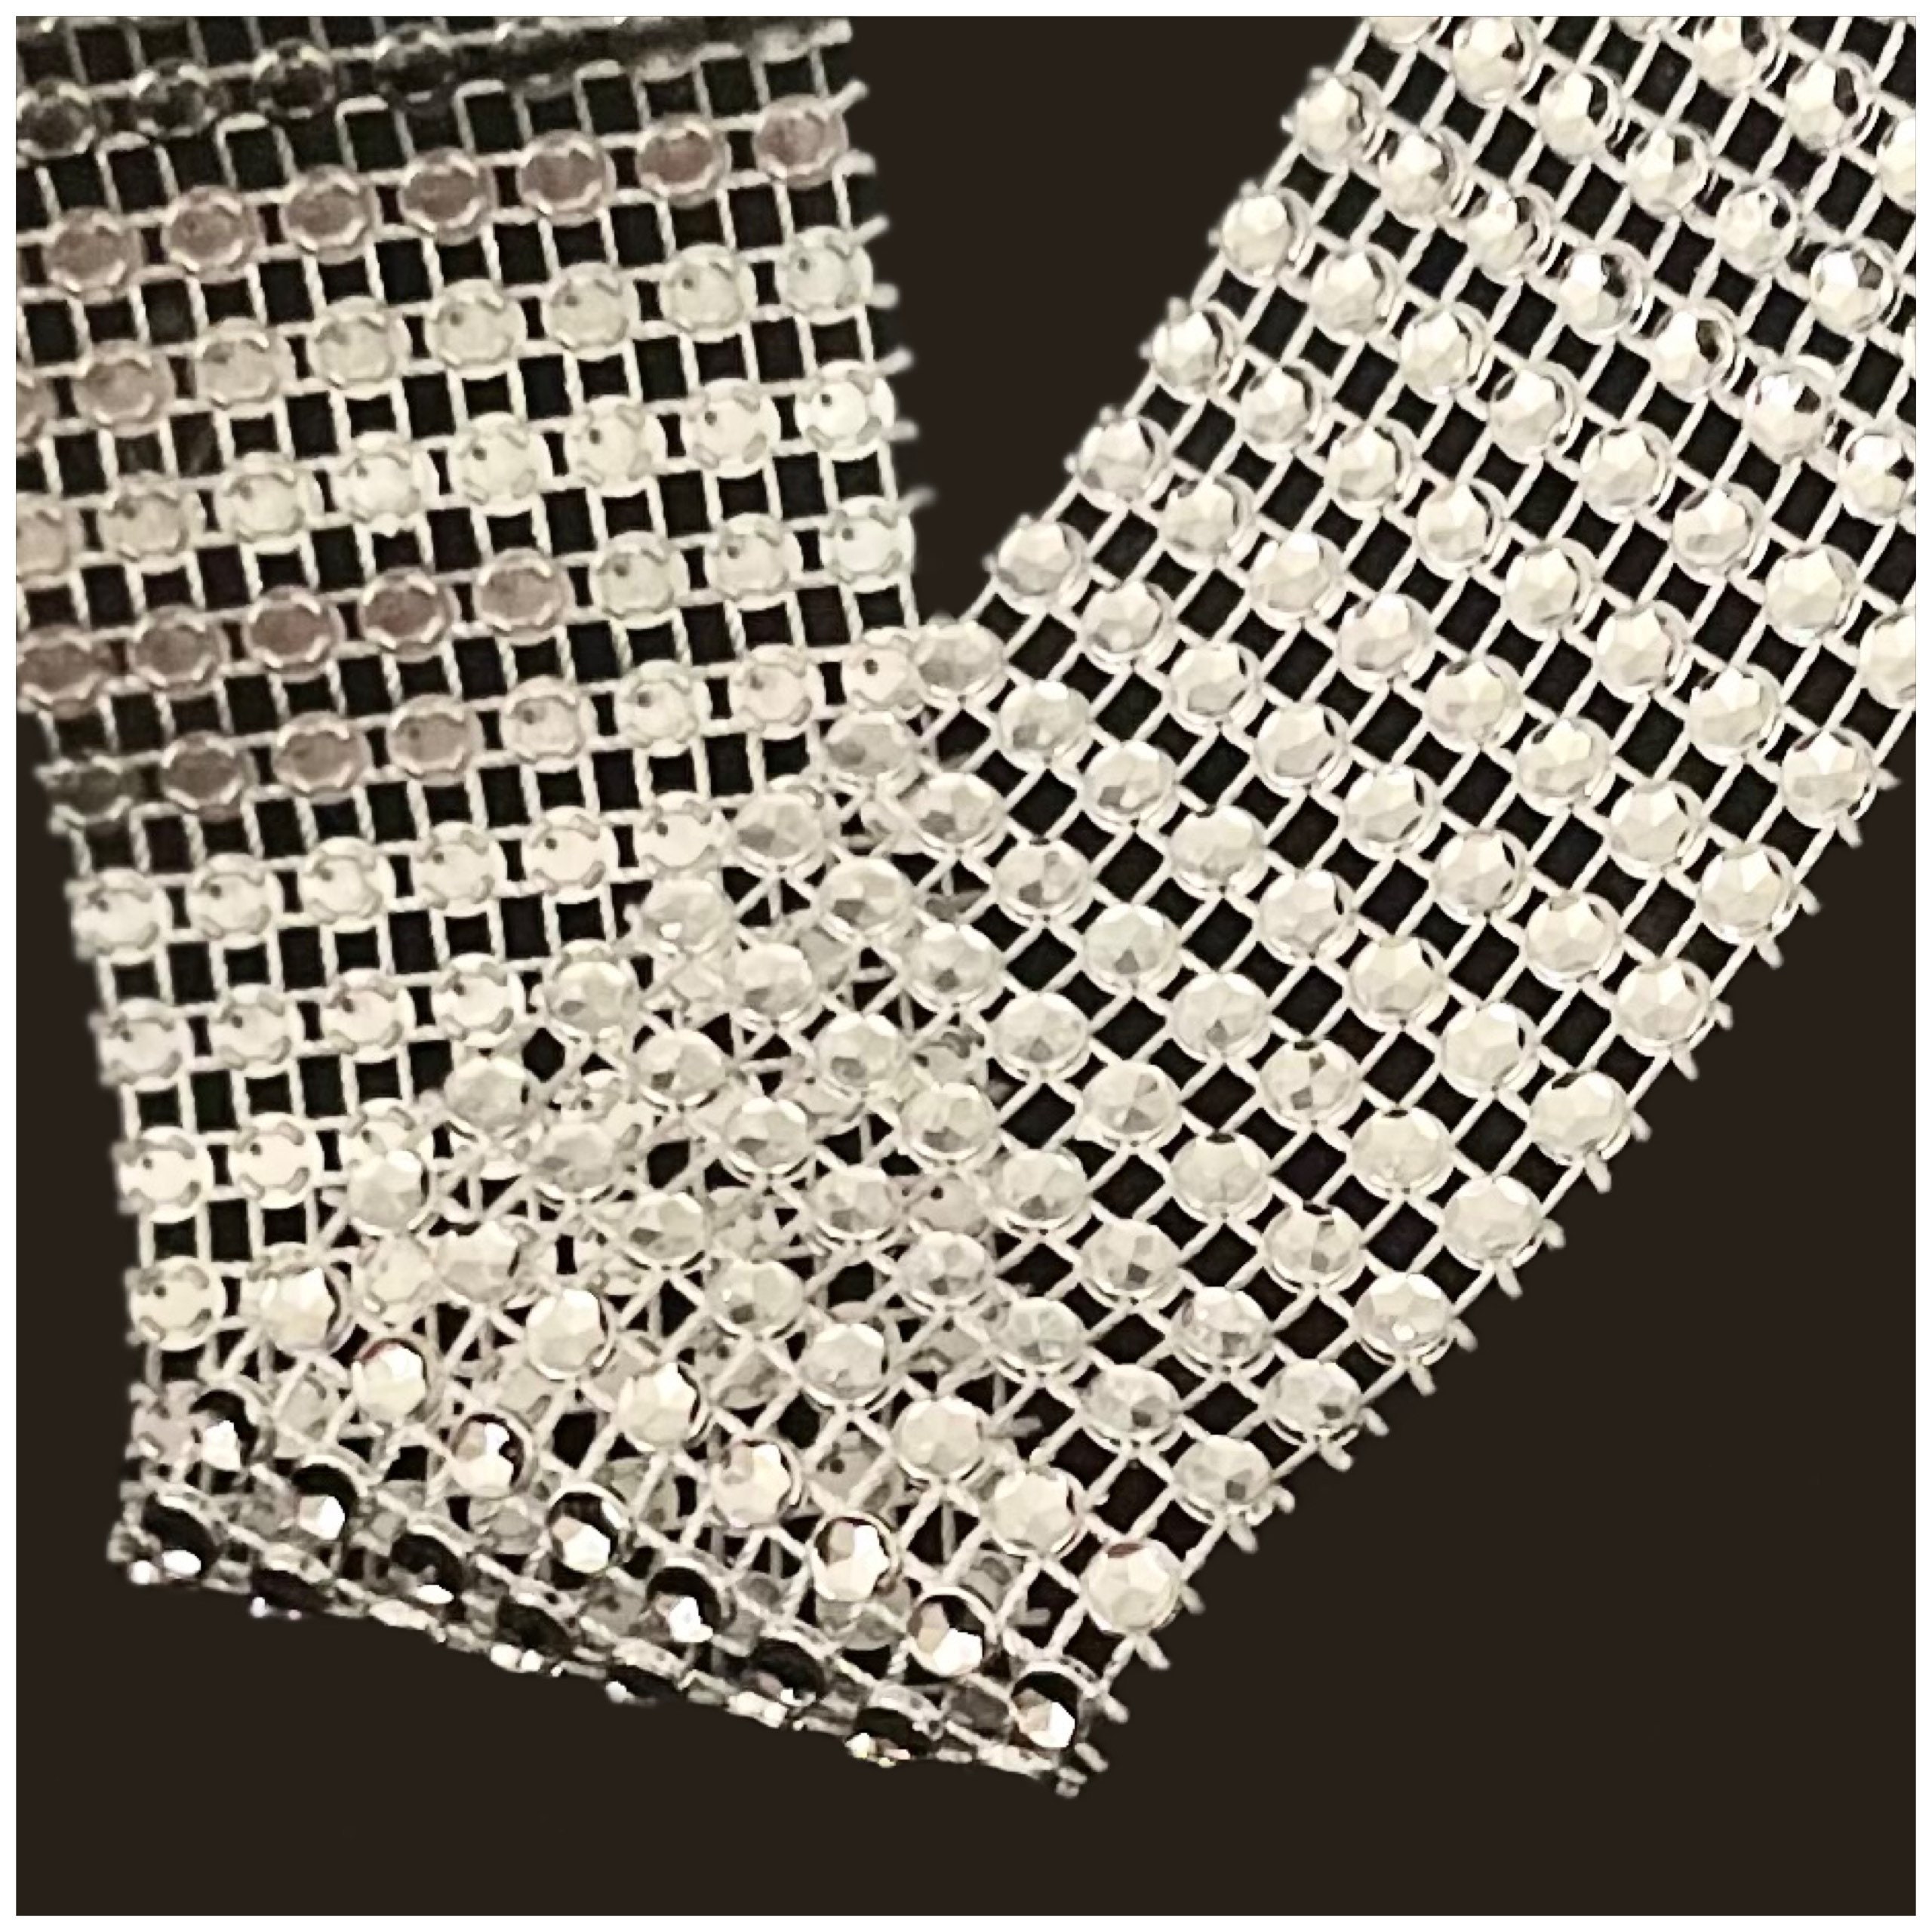 Rhinestone Template Material Sheets,hotfix Transfer Tape for Loose